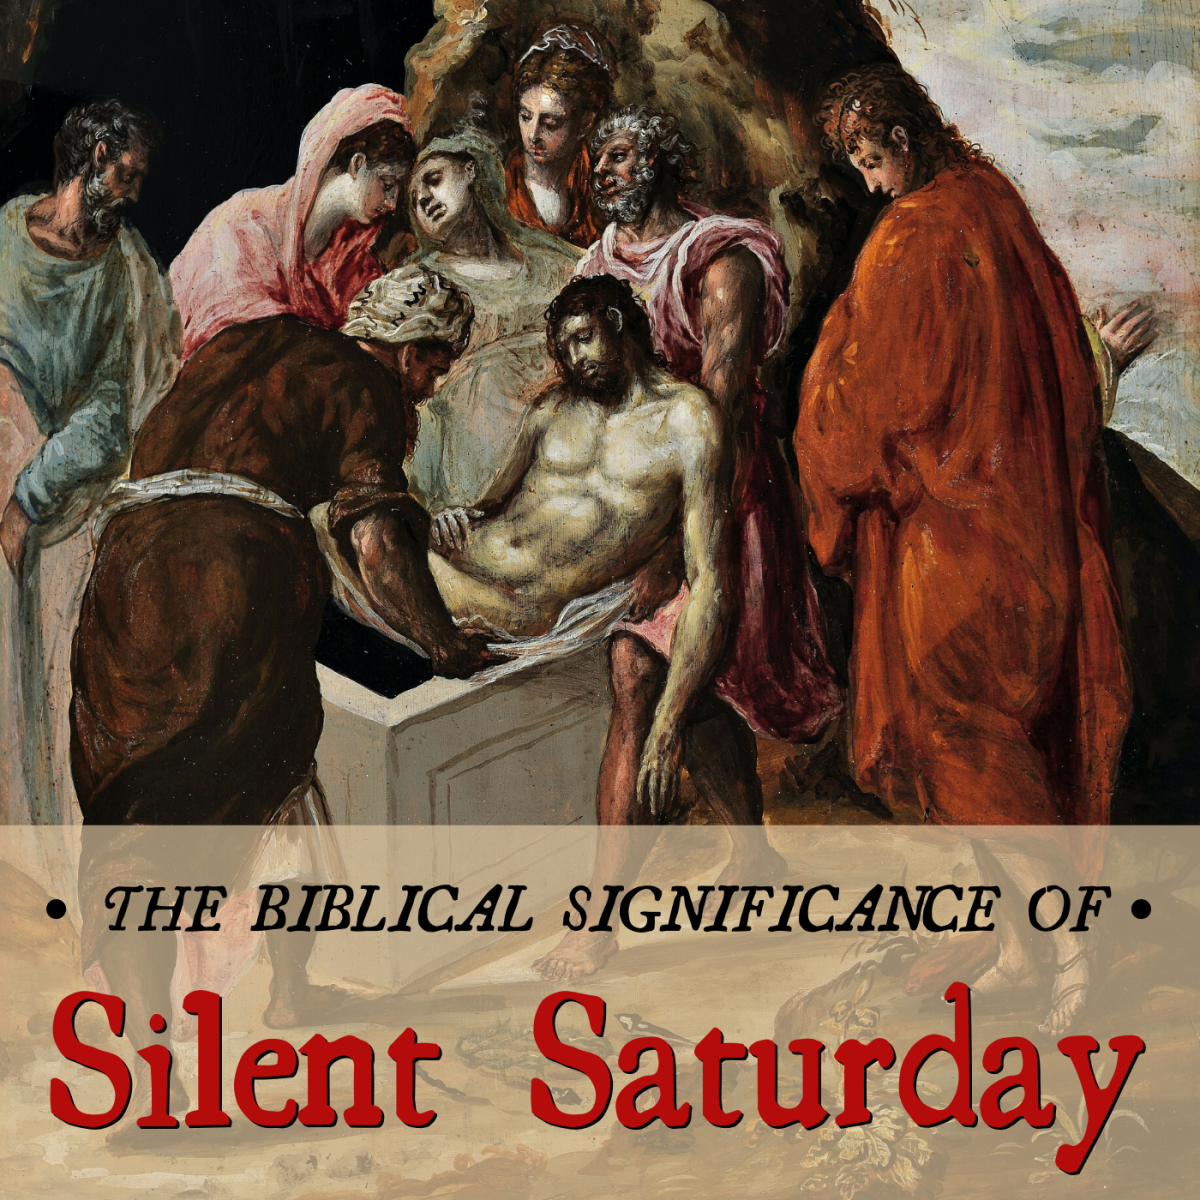 The Silence of Saturday (The Day Before Easter) in Christianity